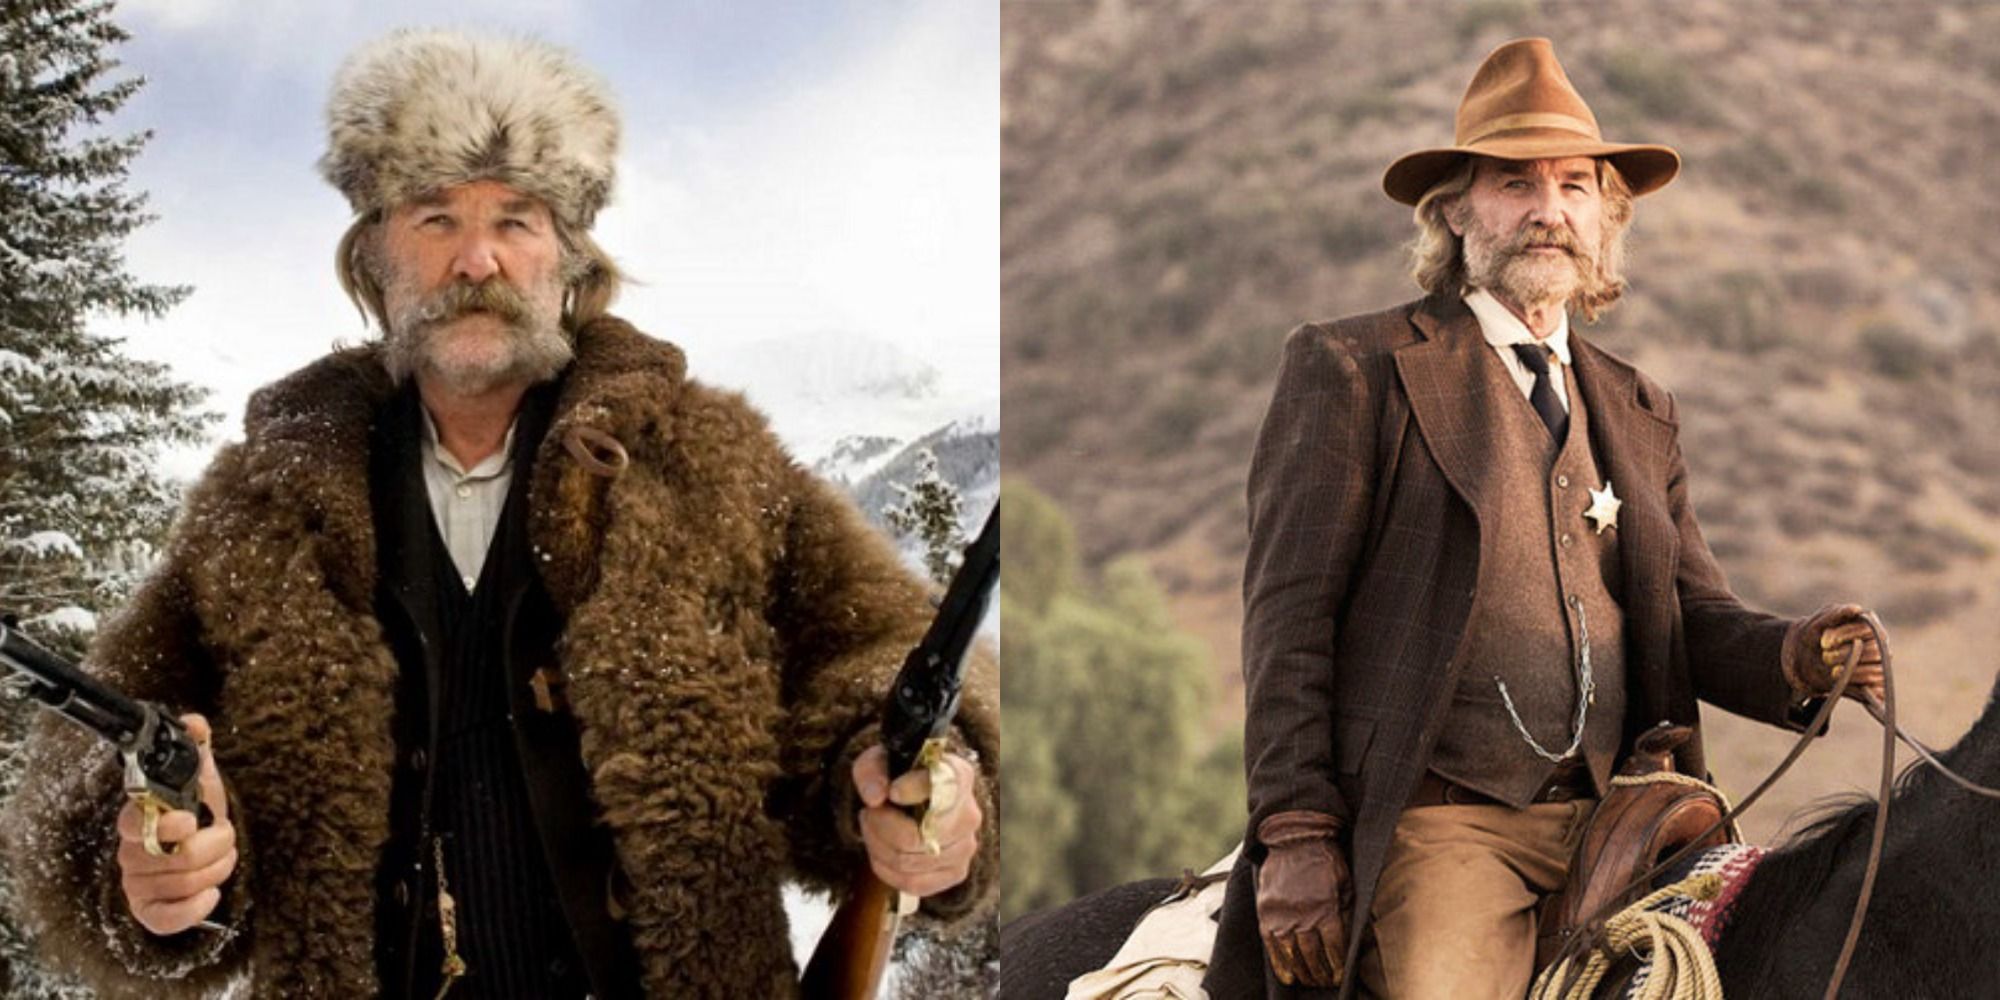 Split image showing Kurt Russell in The Hateful Eight and Bone Tomahawk